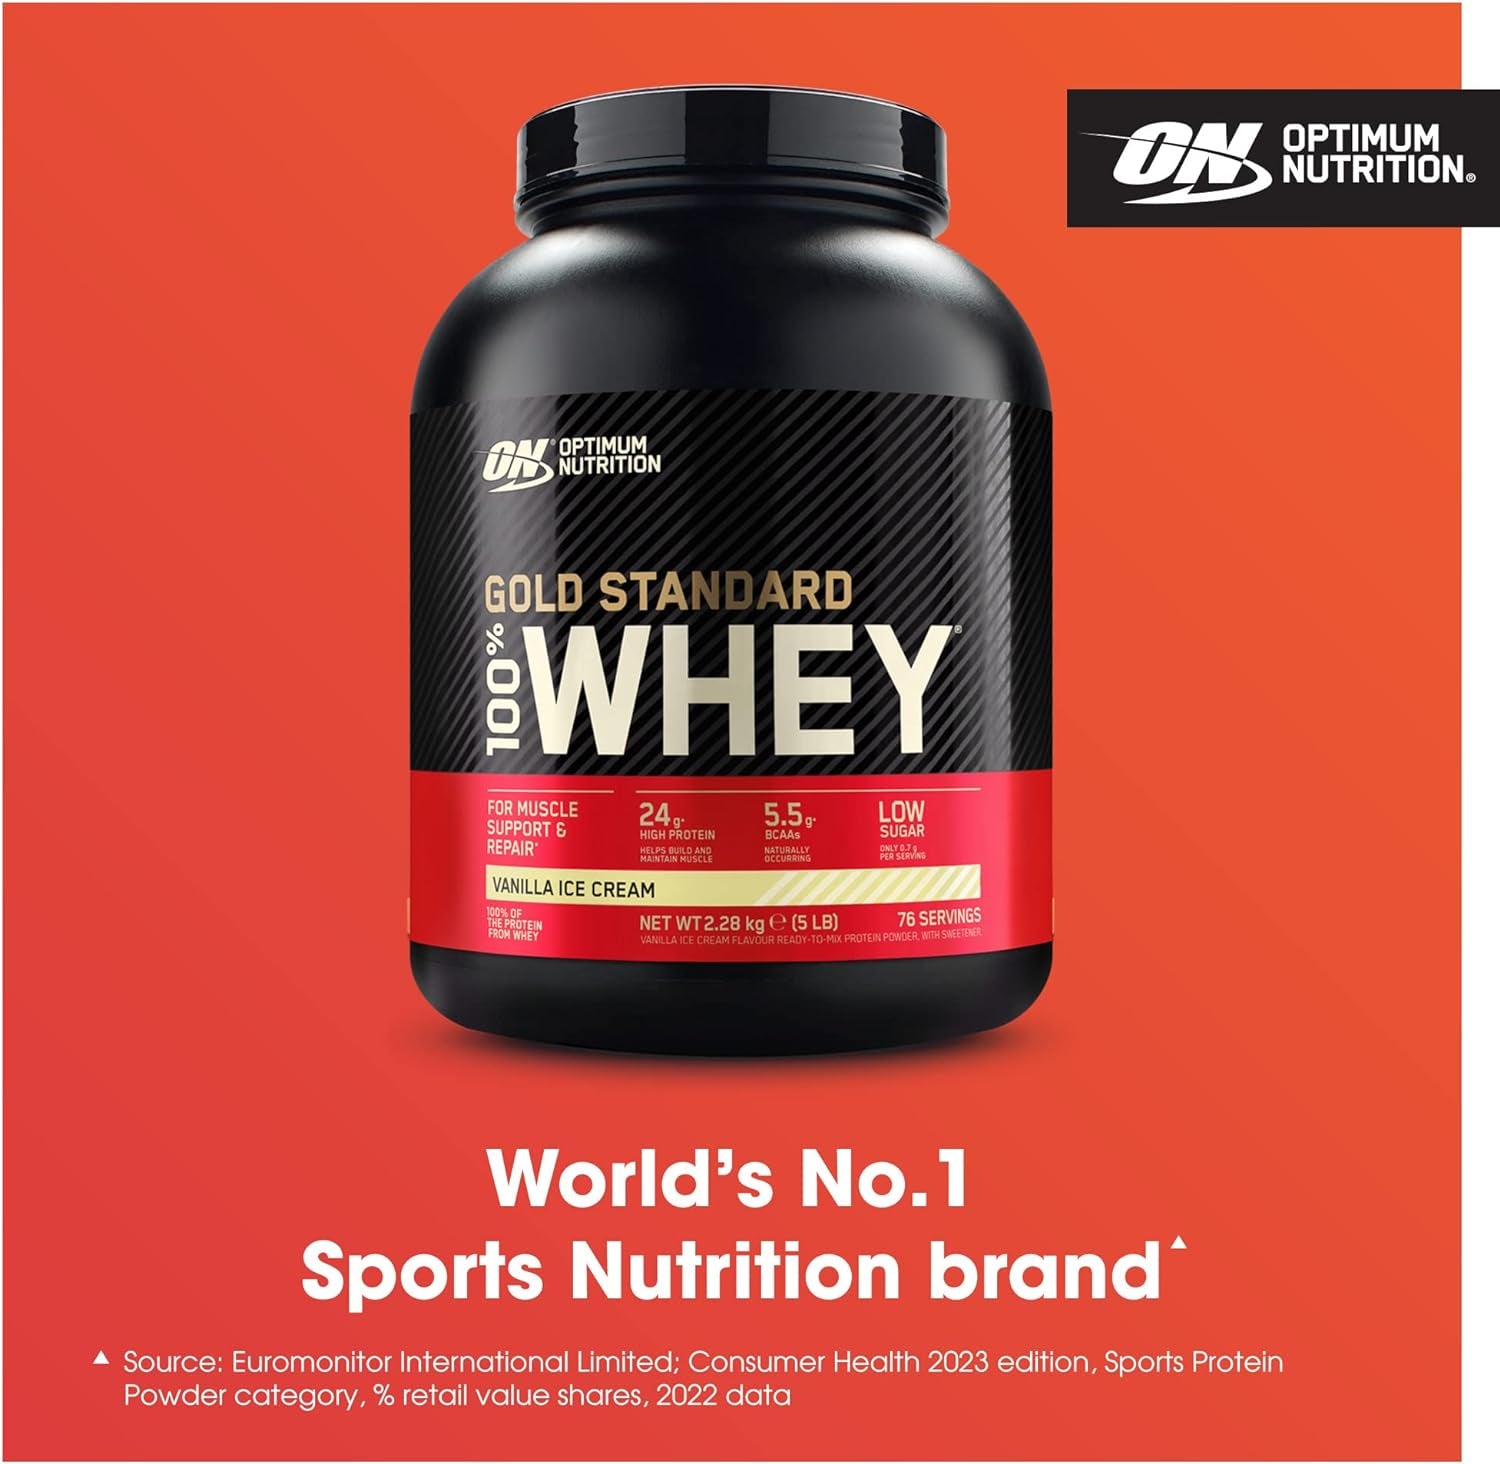 Gold Standard 100% Whey Muscle Building and Recovery Protein Powder with Naturally Occurring Glutamine and BCAA Amino Acids, Vanilla Ice Cream Flavour, 76 Servings, 2.28 Kg